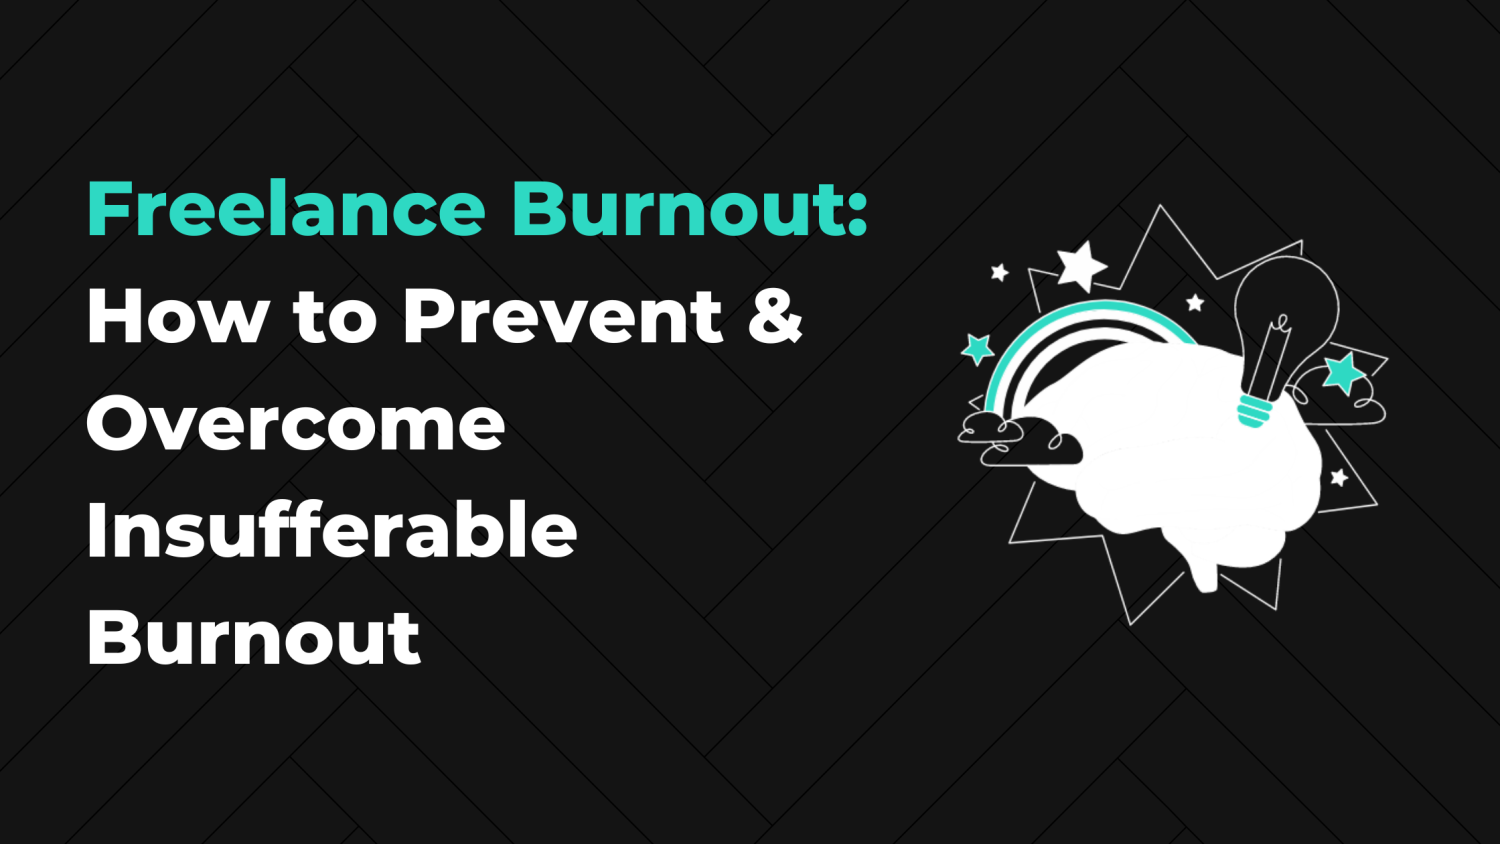 Staying Productive and Avoiding Burnout as a Freelance Web Worker